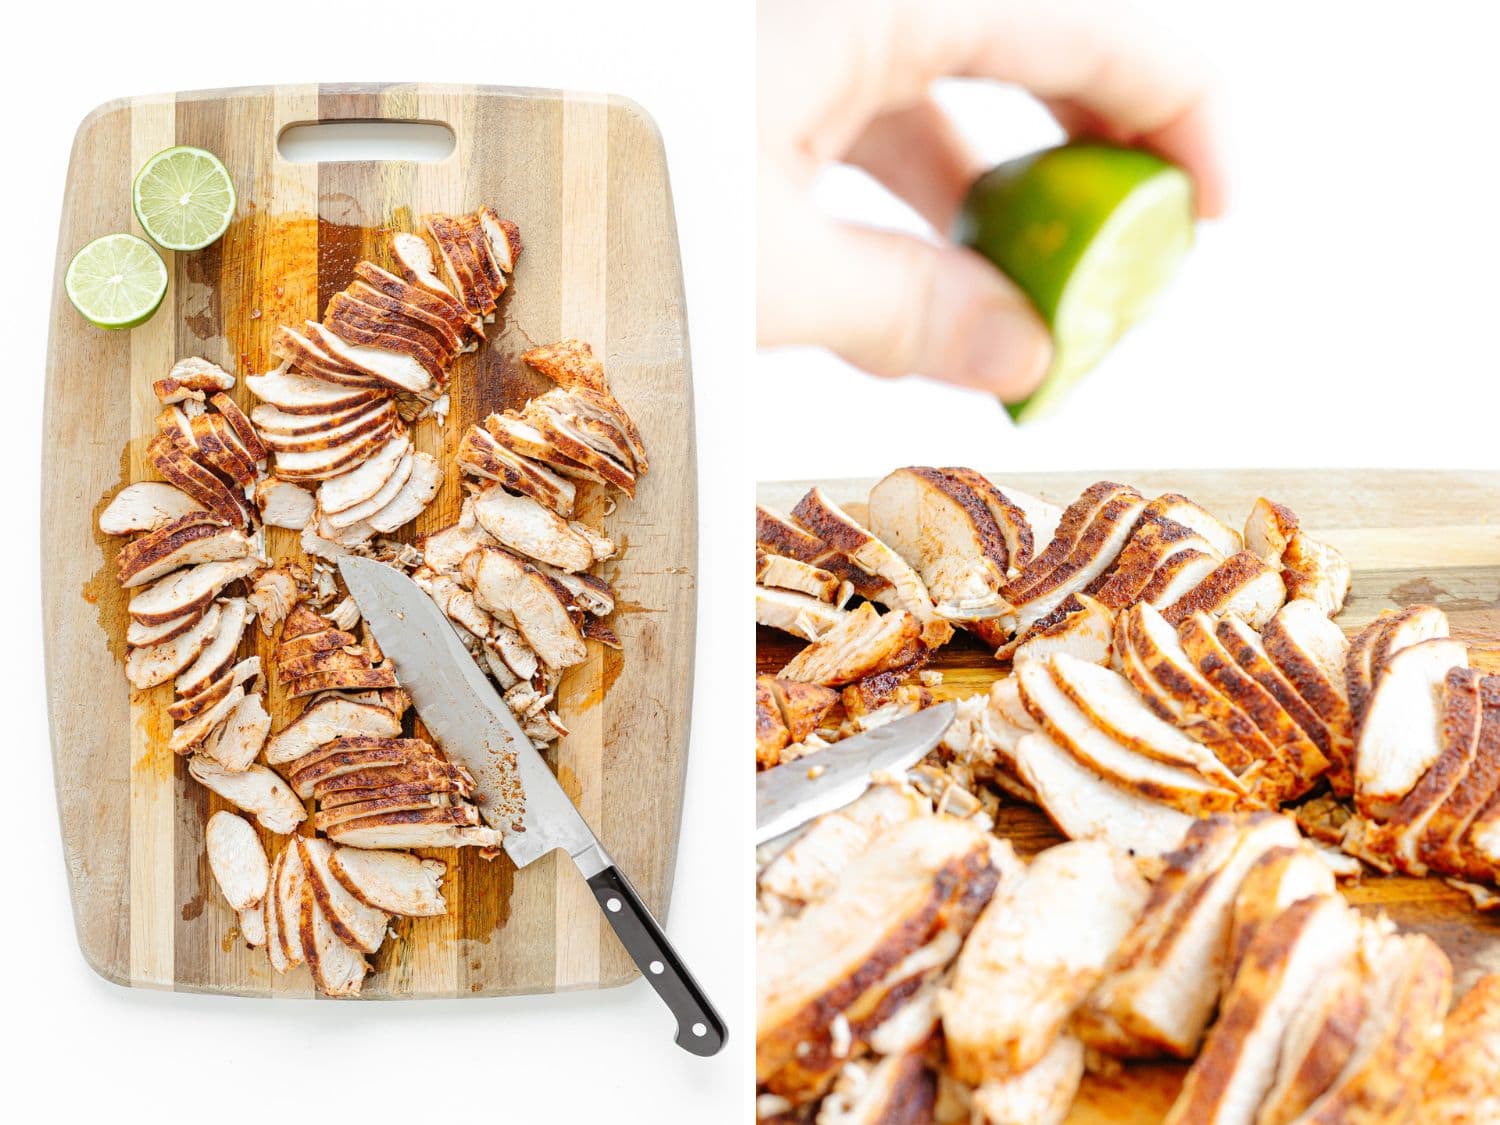 Collage of two photos showing sliced fajita chicken on a cutting board and a hand squeezing lime over top of the chicken.